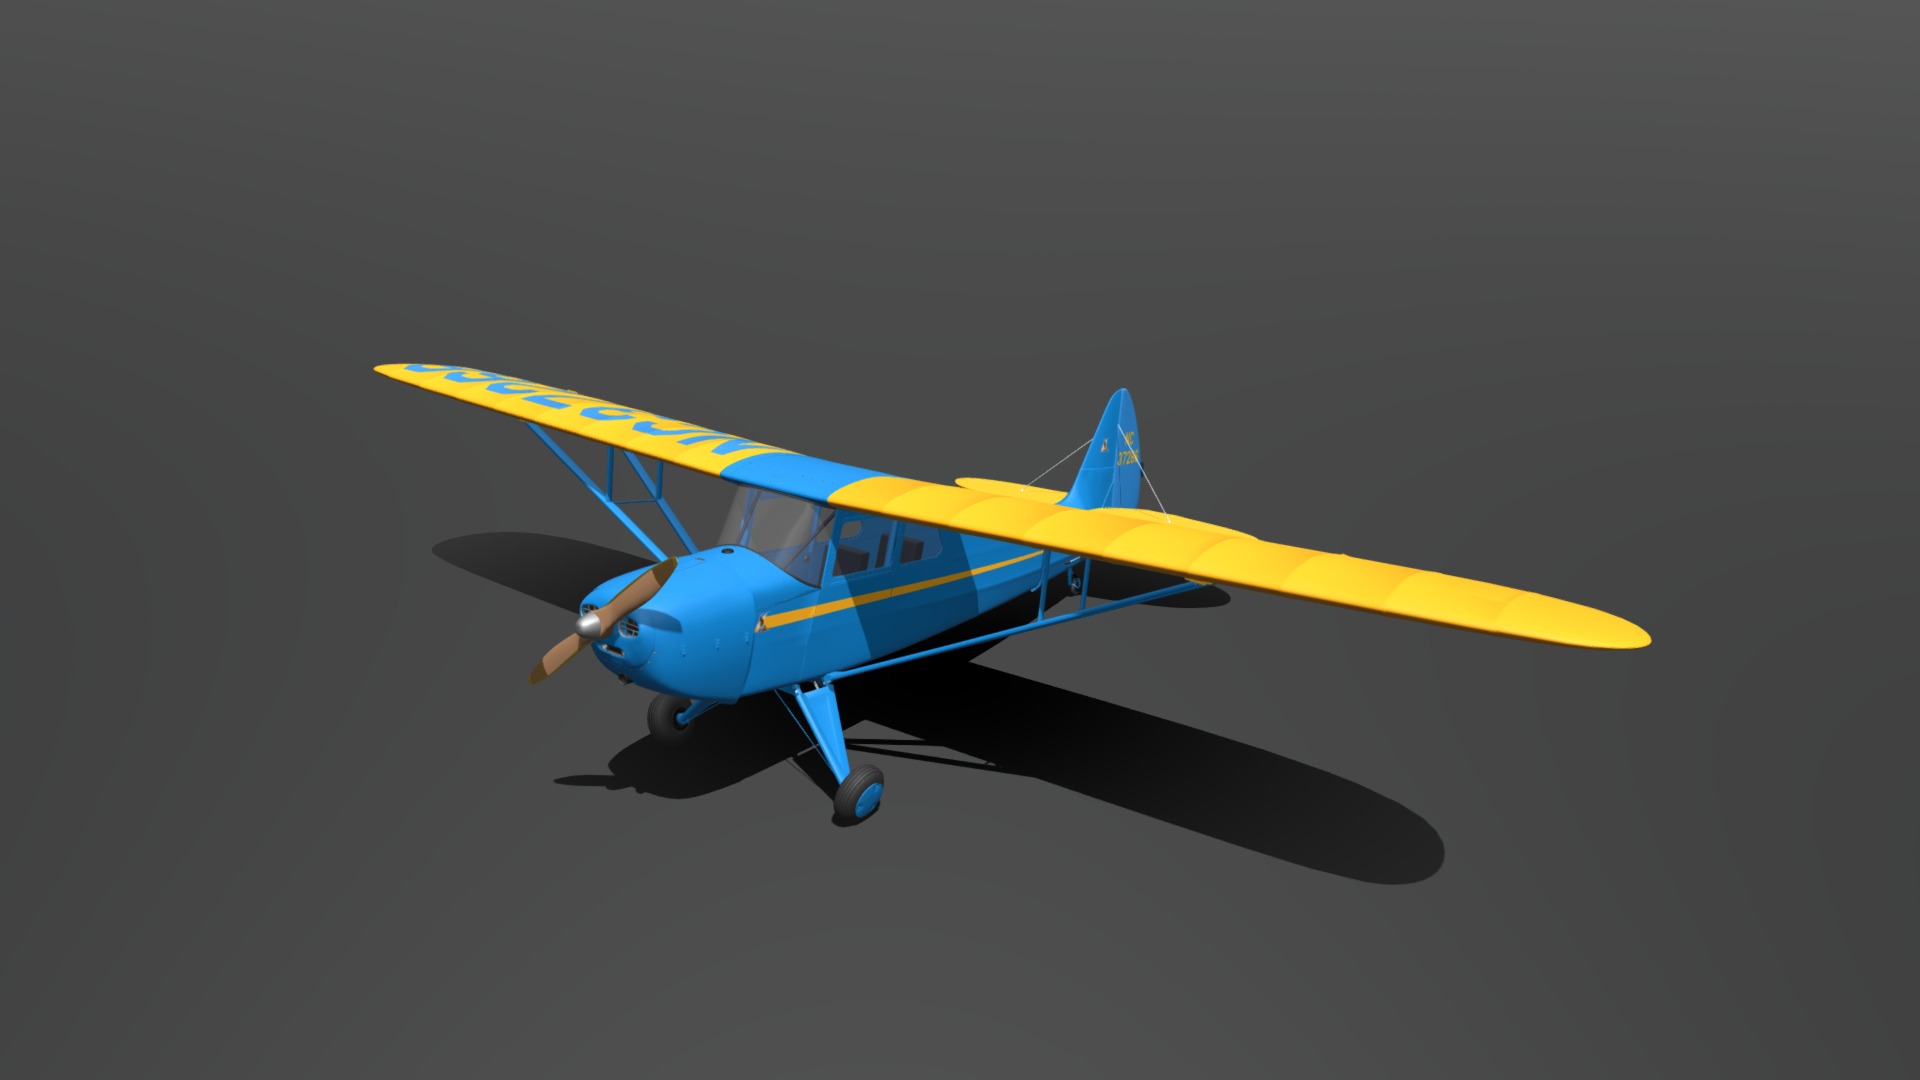 3D model Interstate Cadet - This is a 3D model of the Interstate Cadet. The 3D model is about a blue and yellow toy airplane.